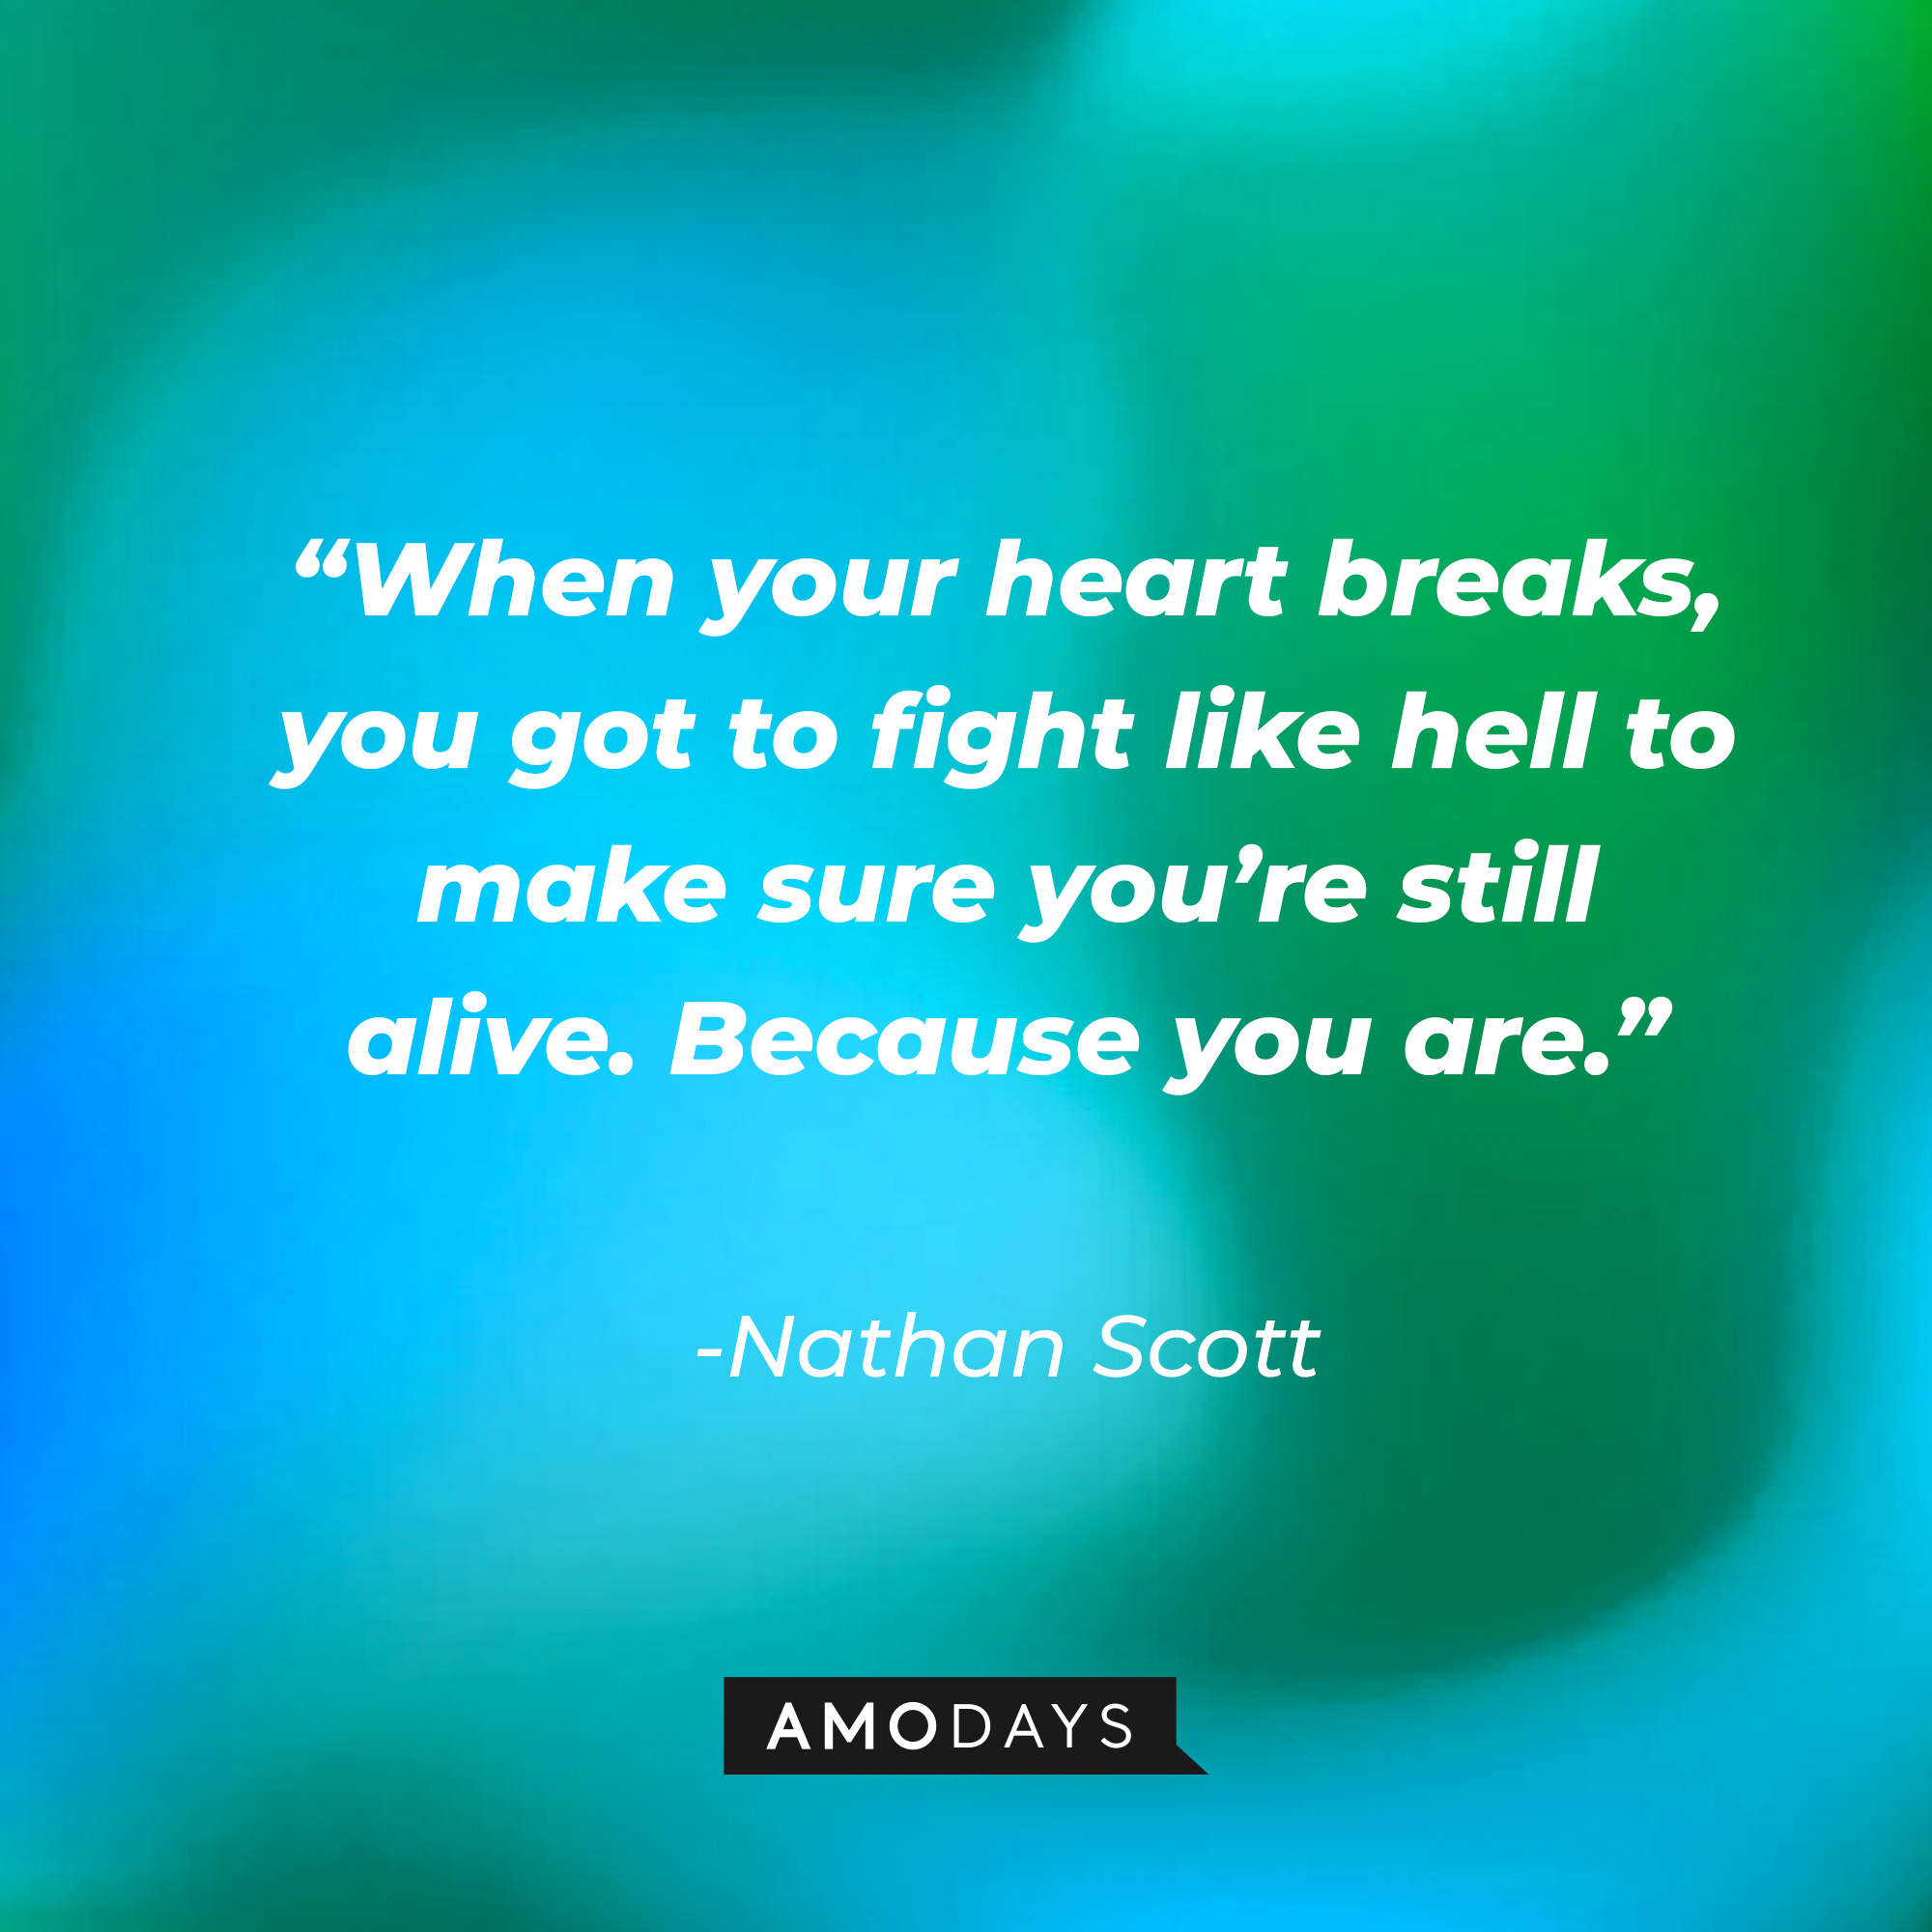 Nathan Scott’s quote:“When your heart breaks, you got to fight like hell to make sure you’re still alive. Because you are.” | Source: AmoDays